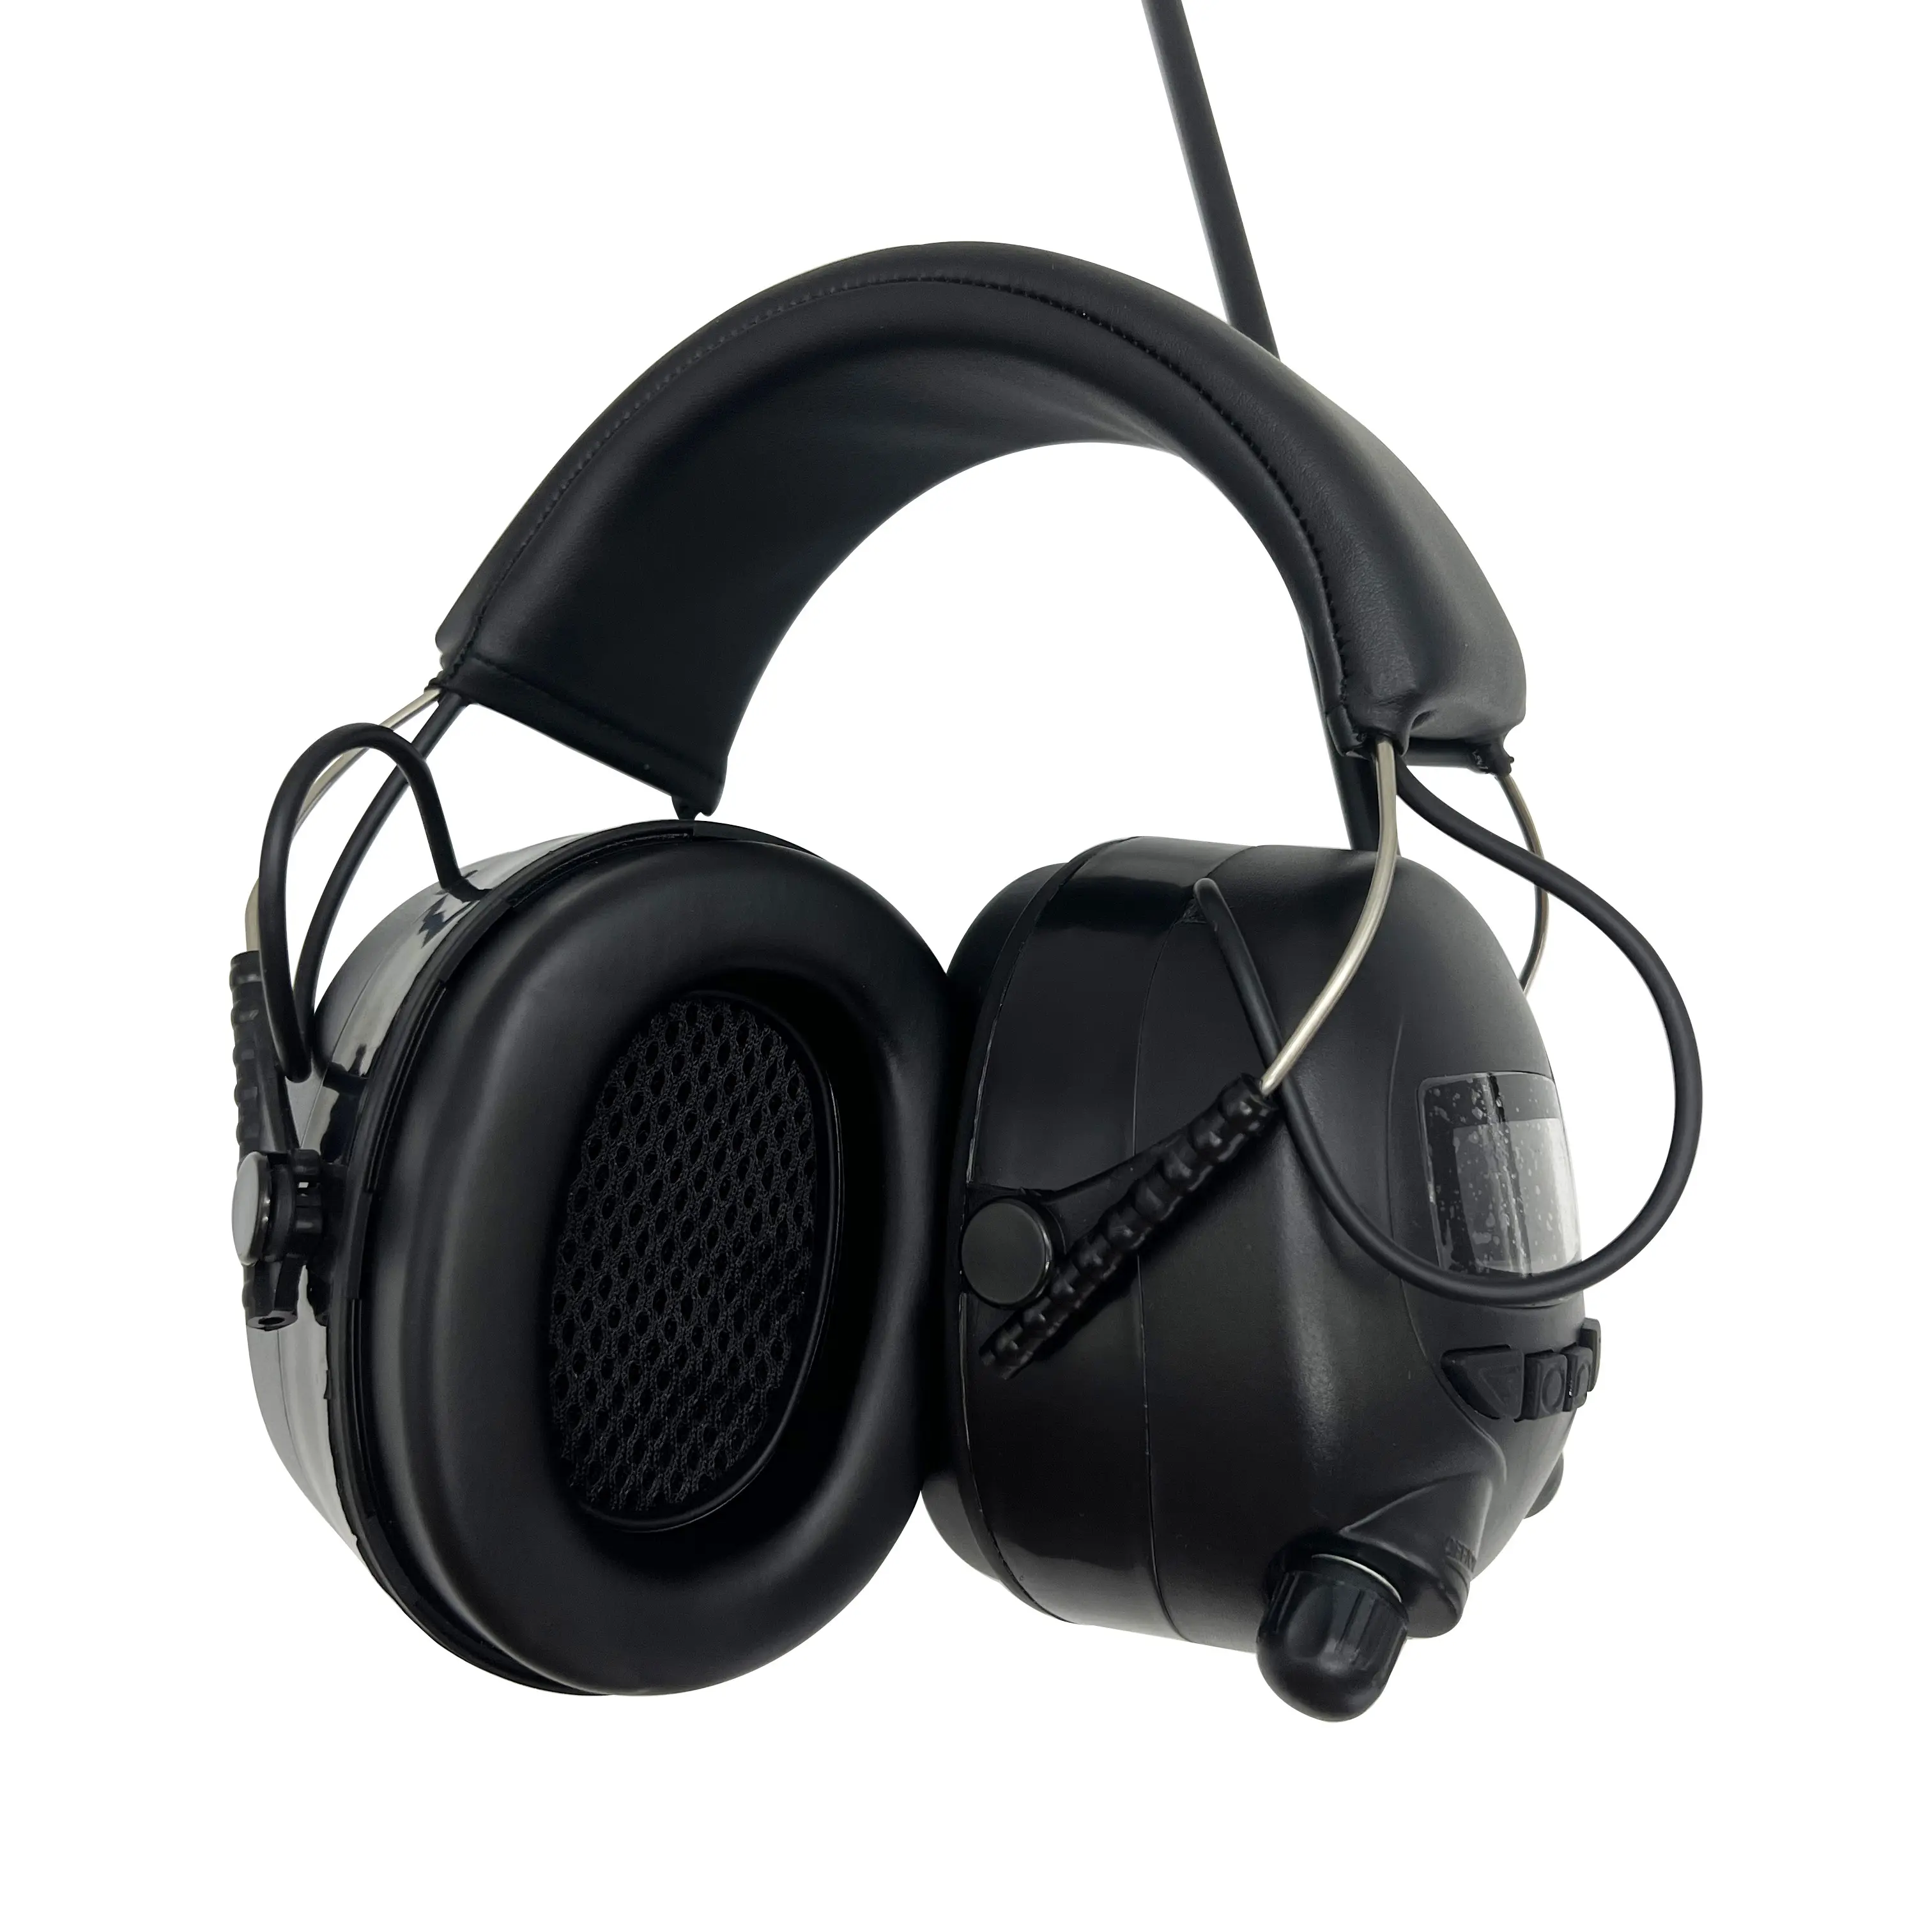 Industrial Am/fm Radio Headphone foldable Hearing Protection earmuffs with External microphone